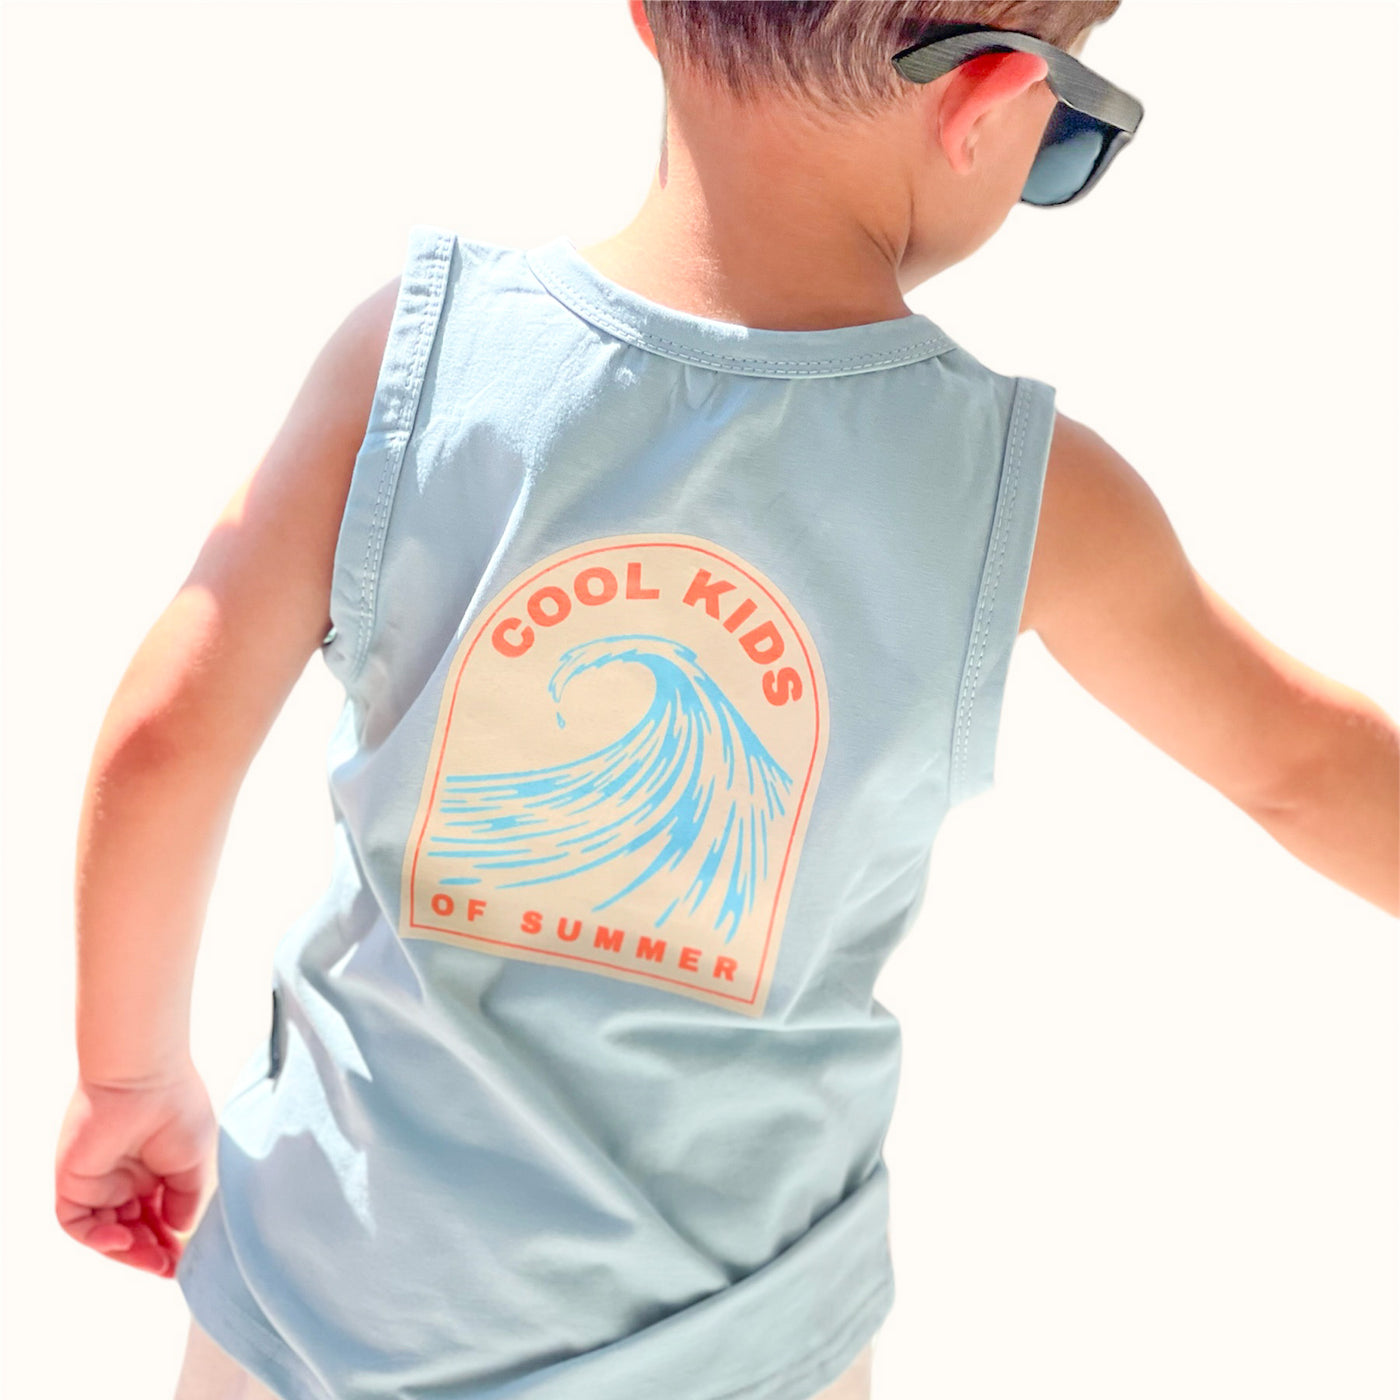 Cool Kids of Summer Muscle Tank